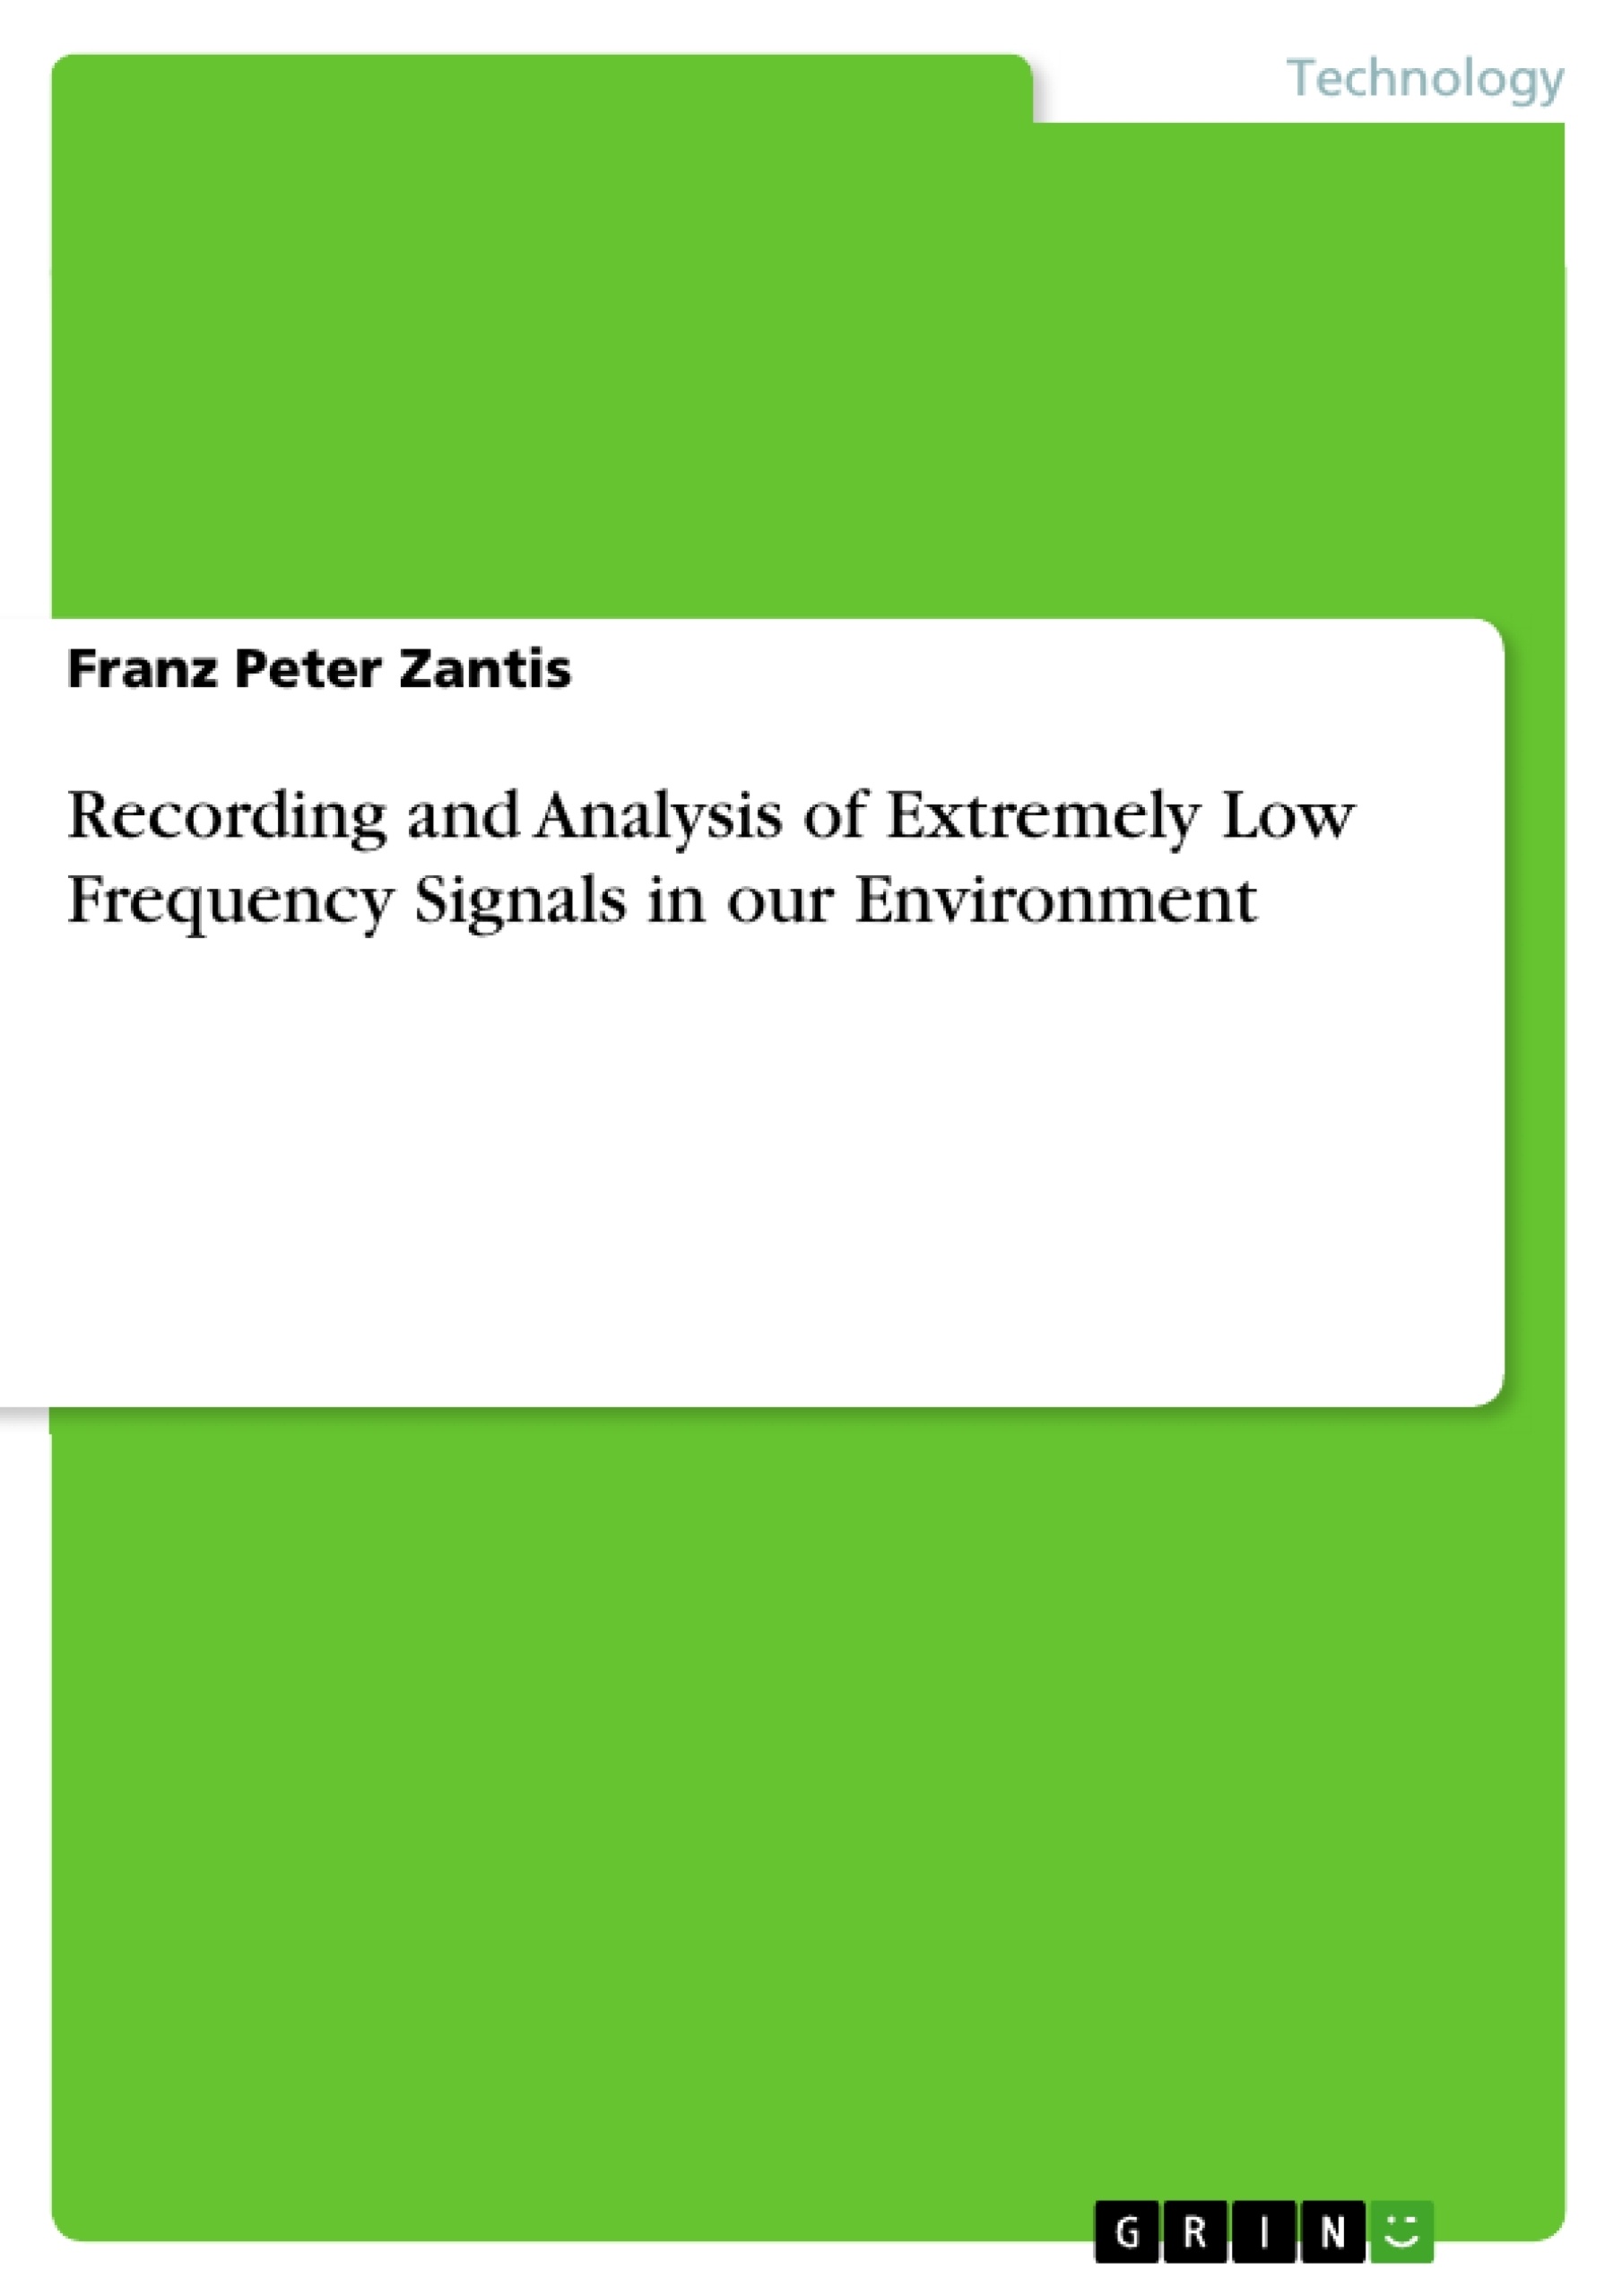 Título: Recording and Analysis of Extremely Low Frequency Signals in our Environment